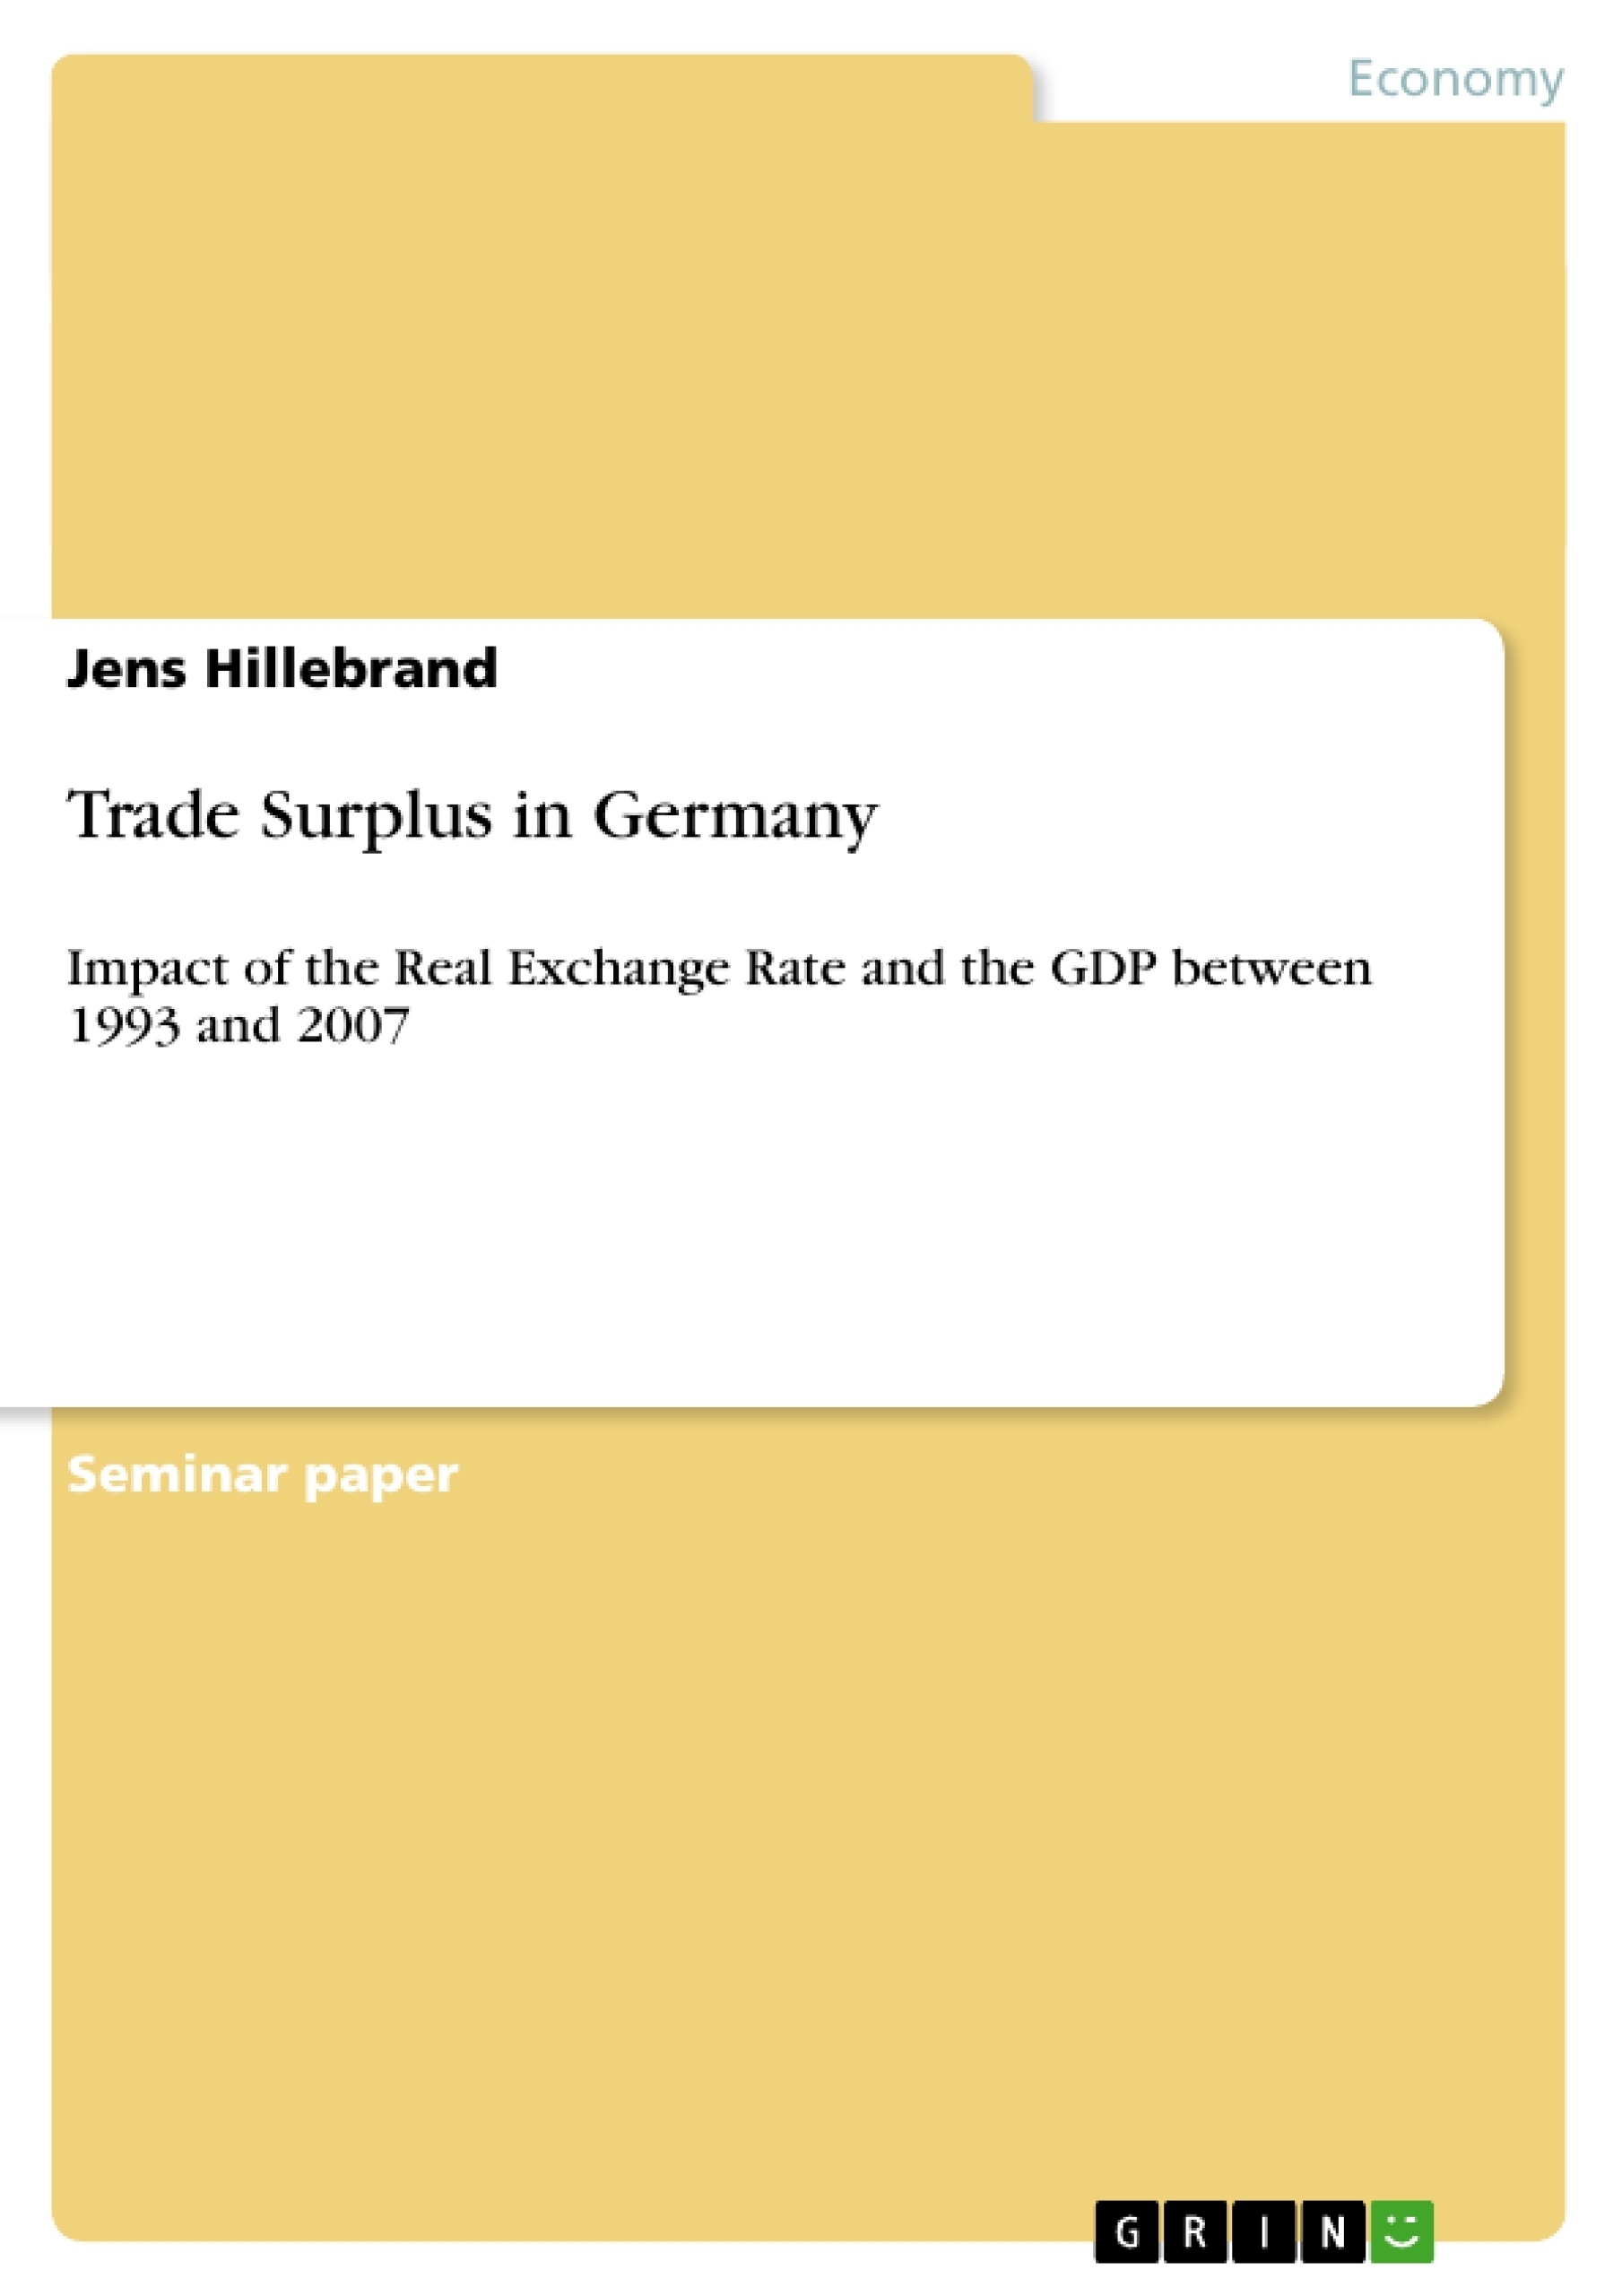 Title: Trade Surplus in Germany